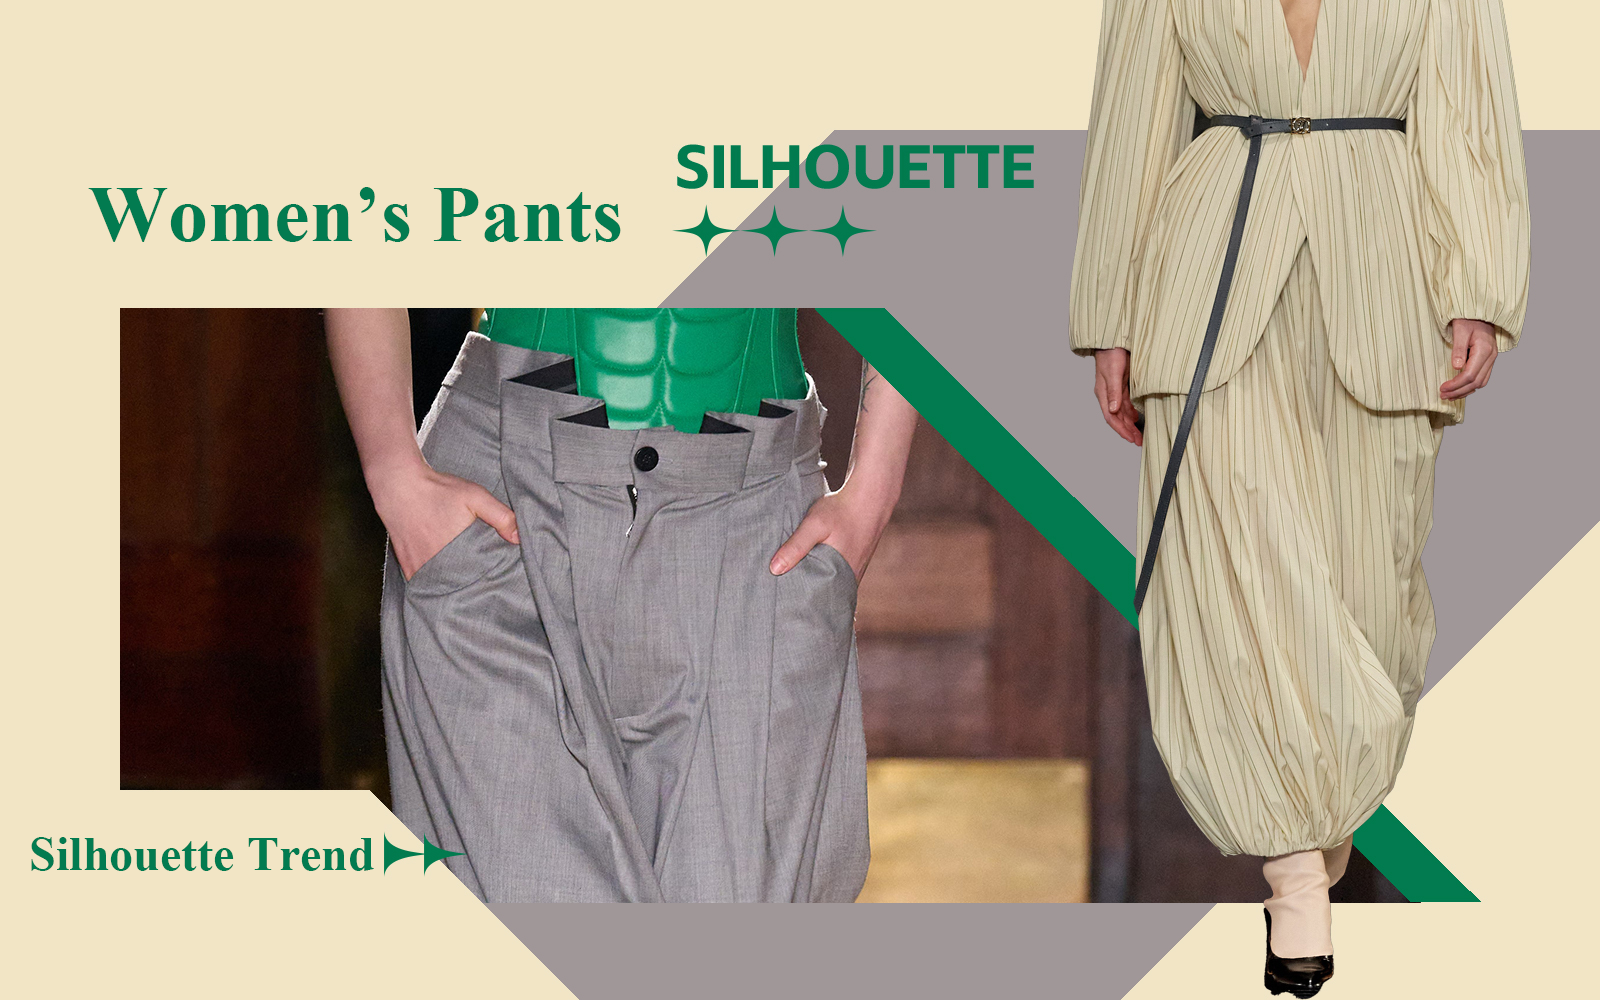 Body-inclusive -- The Silhouette Trend for Women's Pants